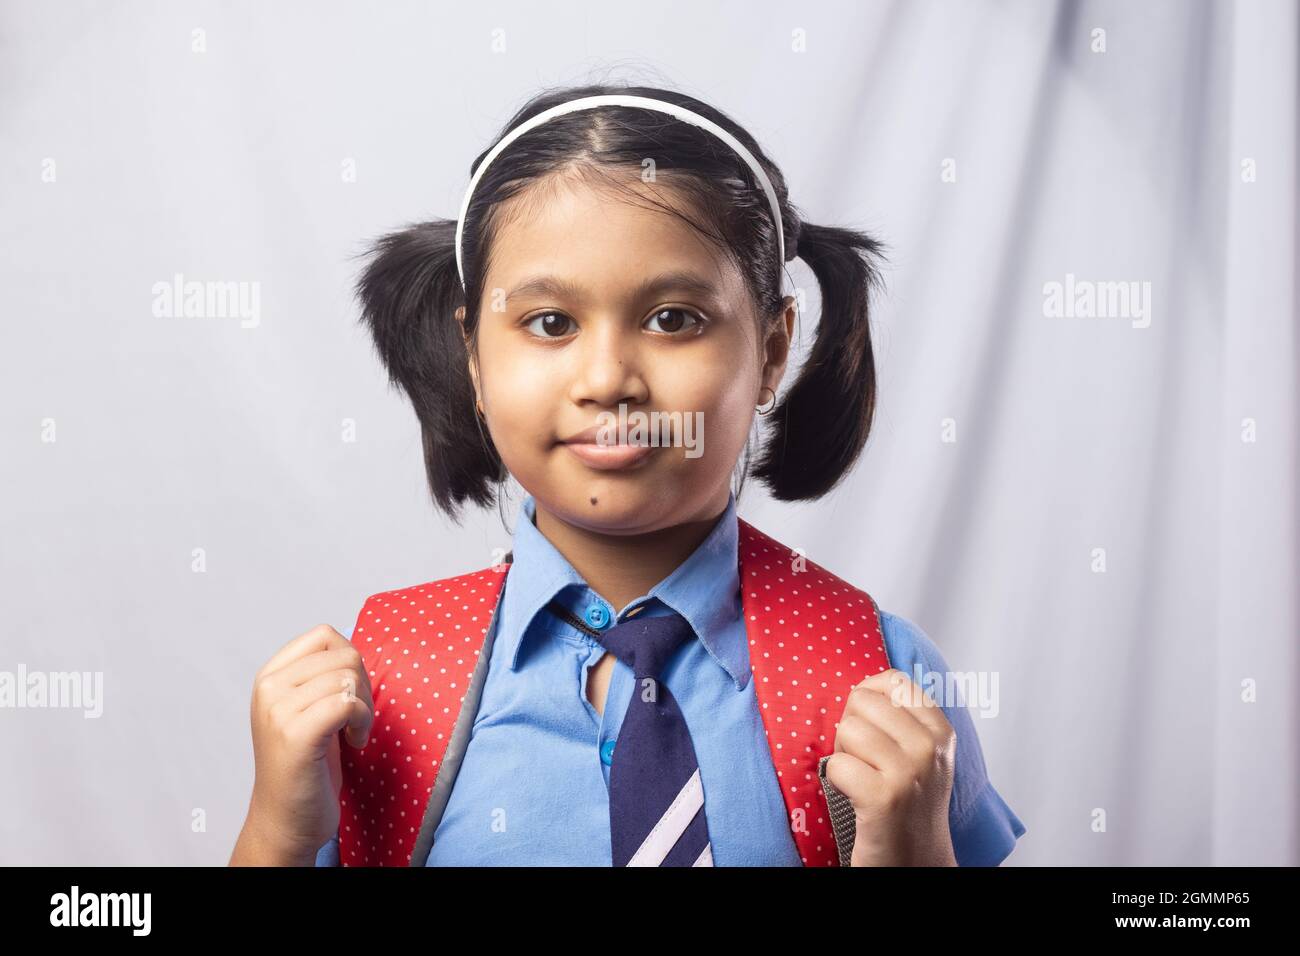 Portrait of a happy smiling Indian girl child student in blue school uniform with red bag on grey background Stock Photo